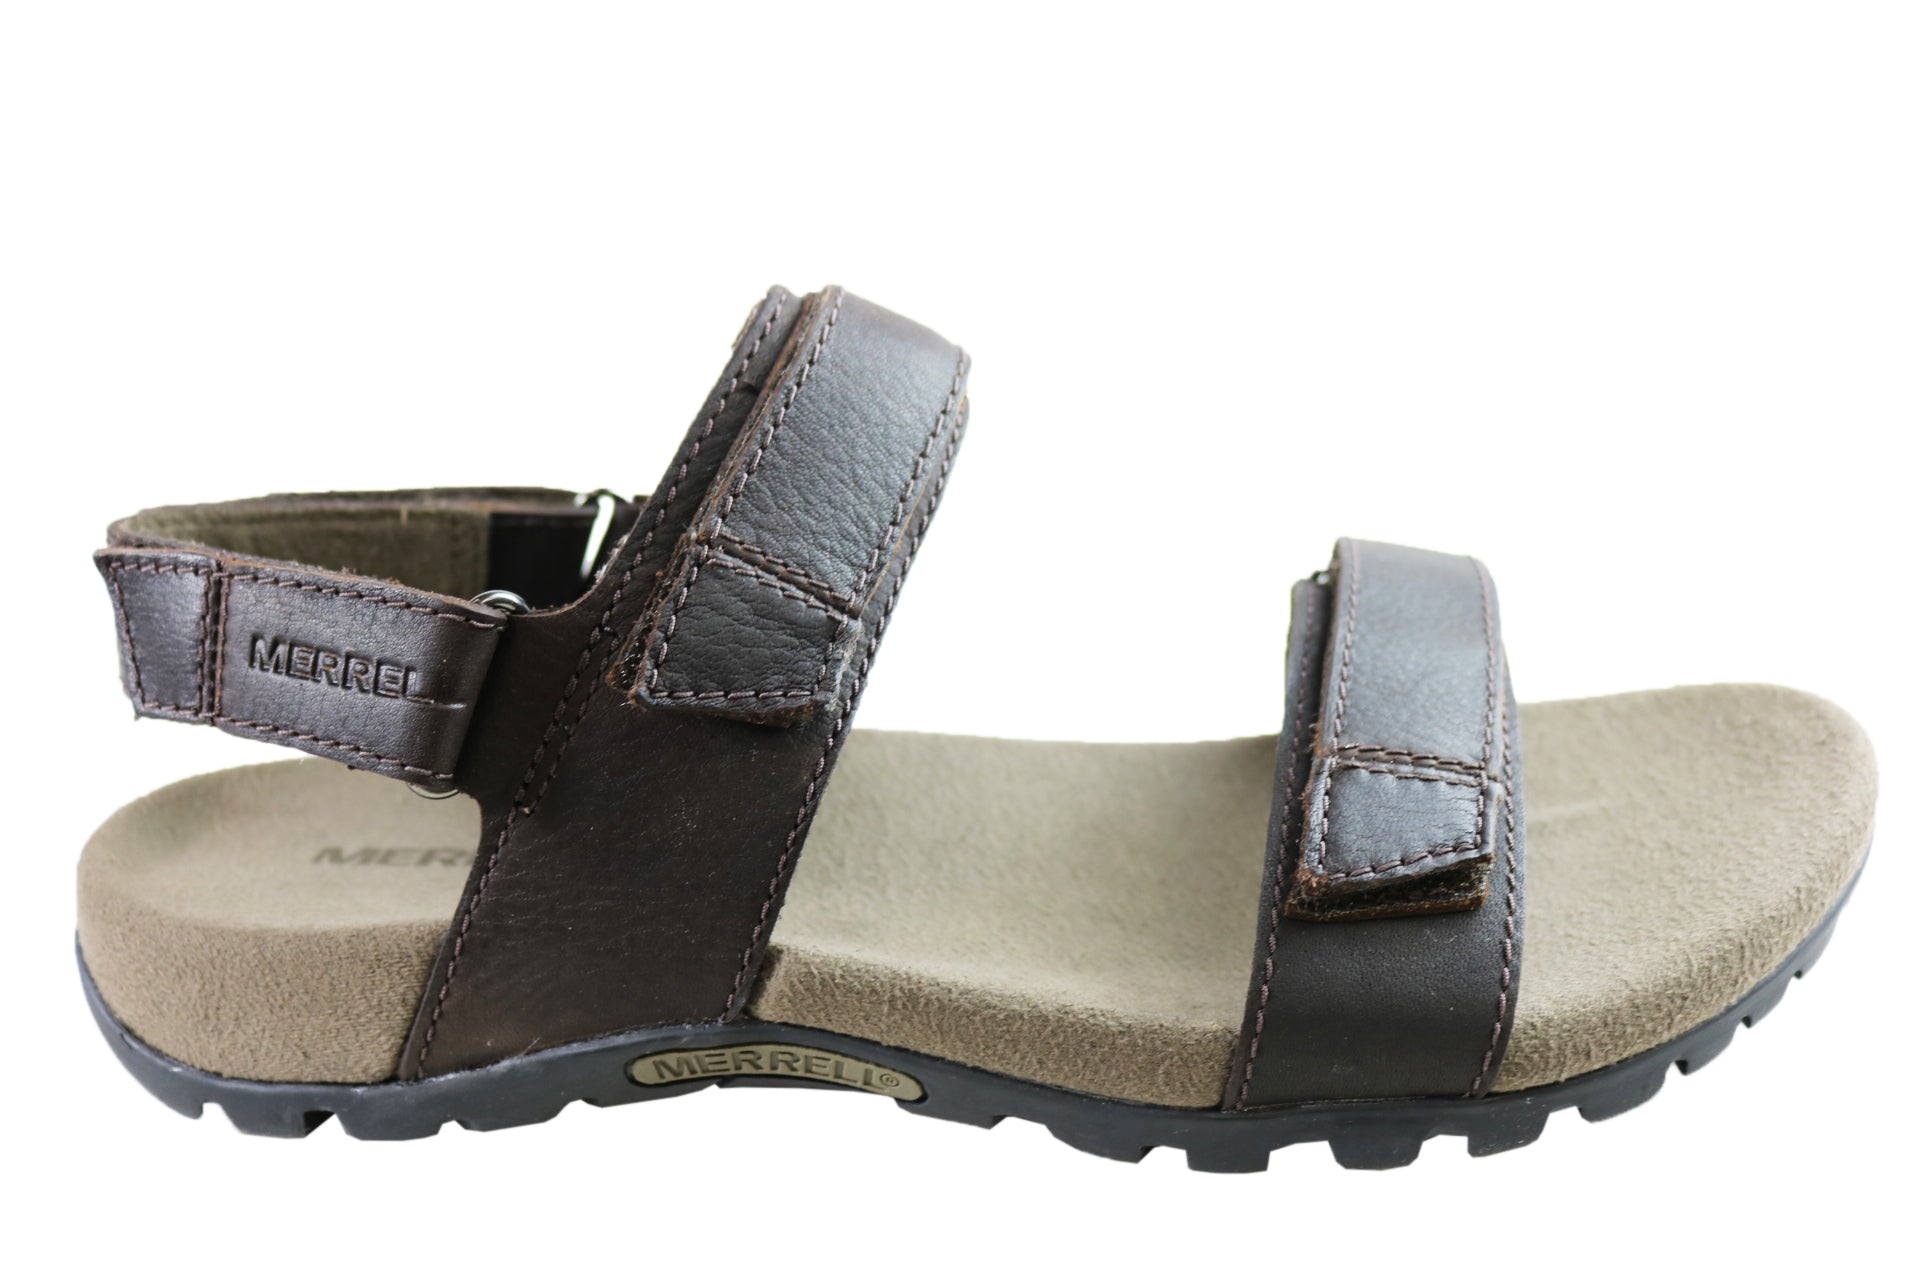 mens sandals with backstrap